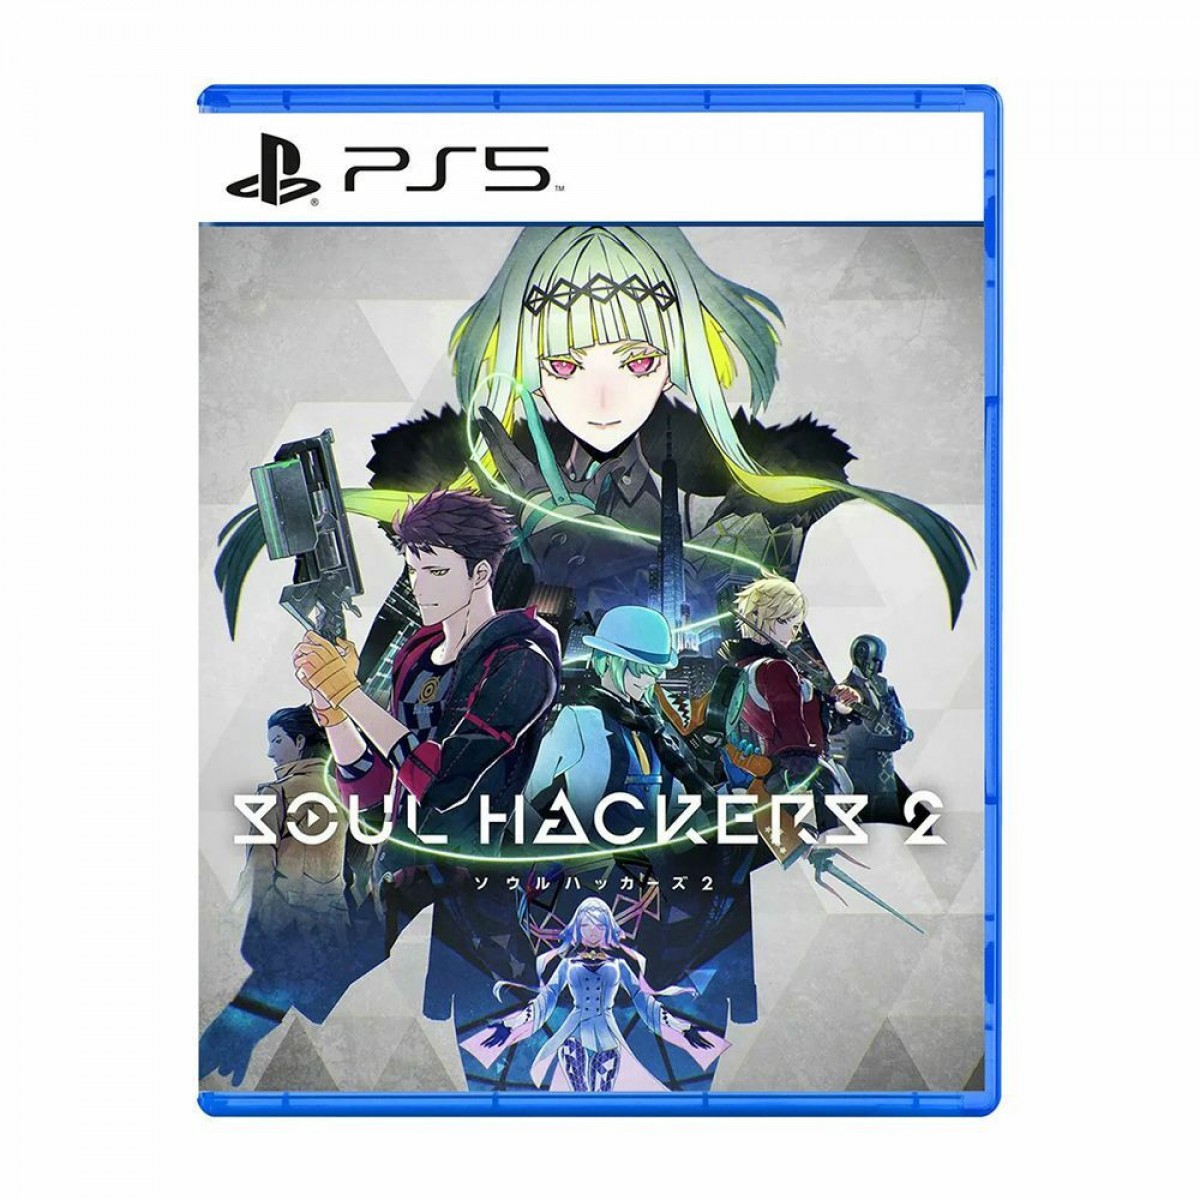 PS5 SOUL HACKERS 2 GAME